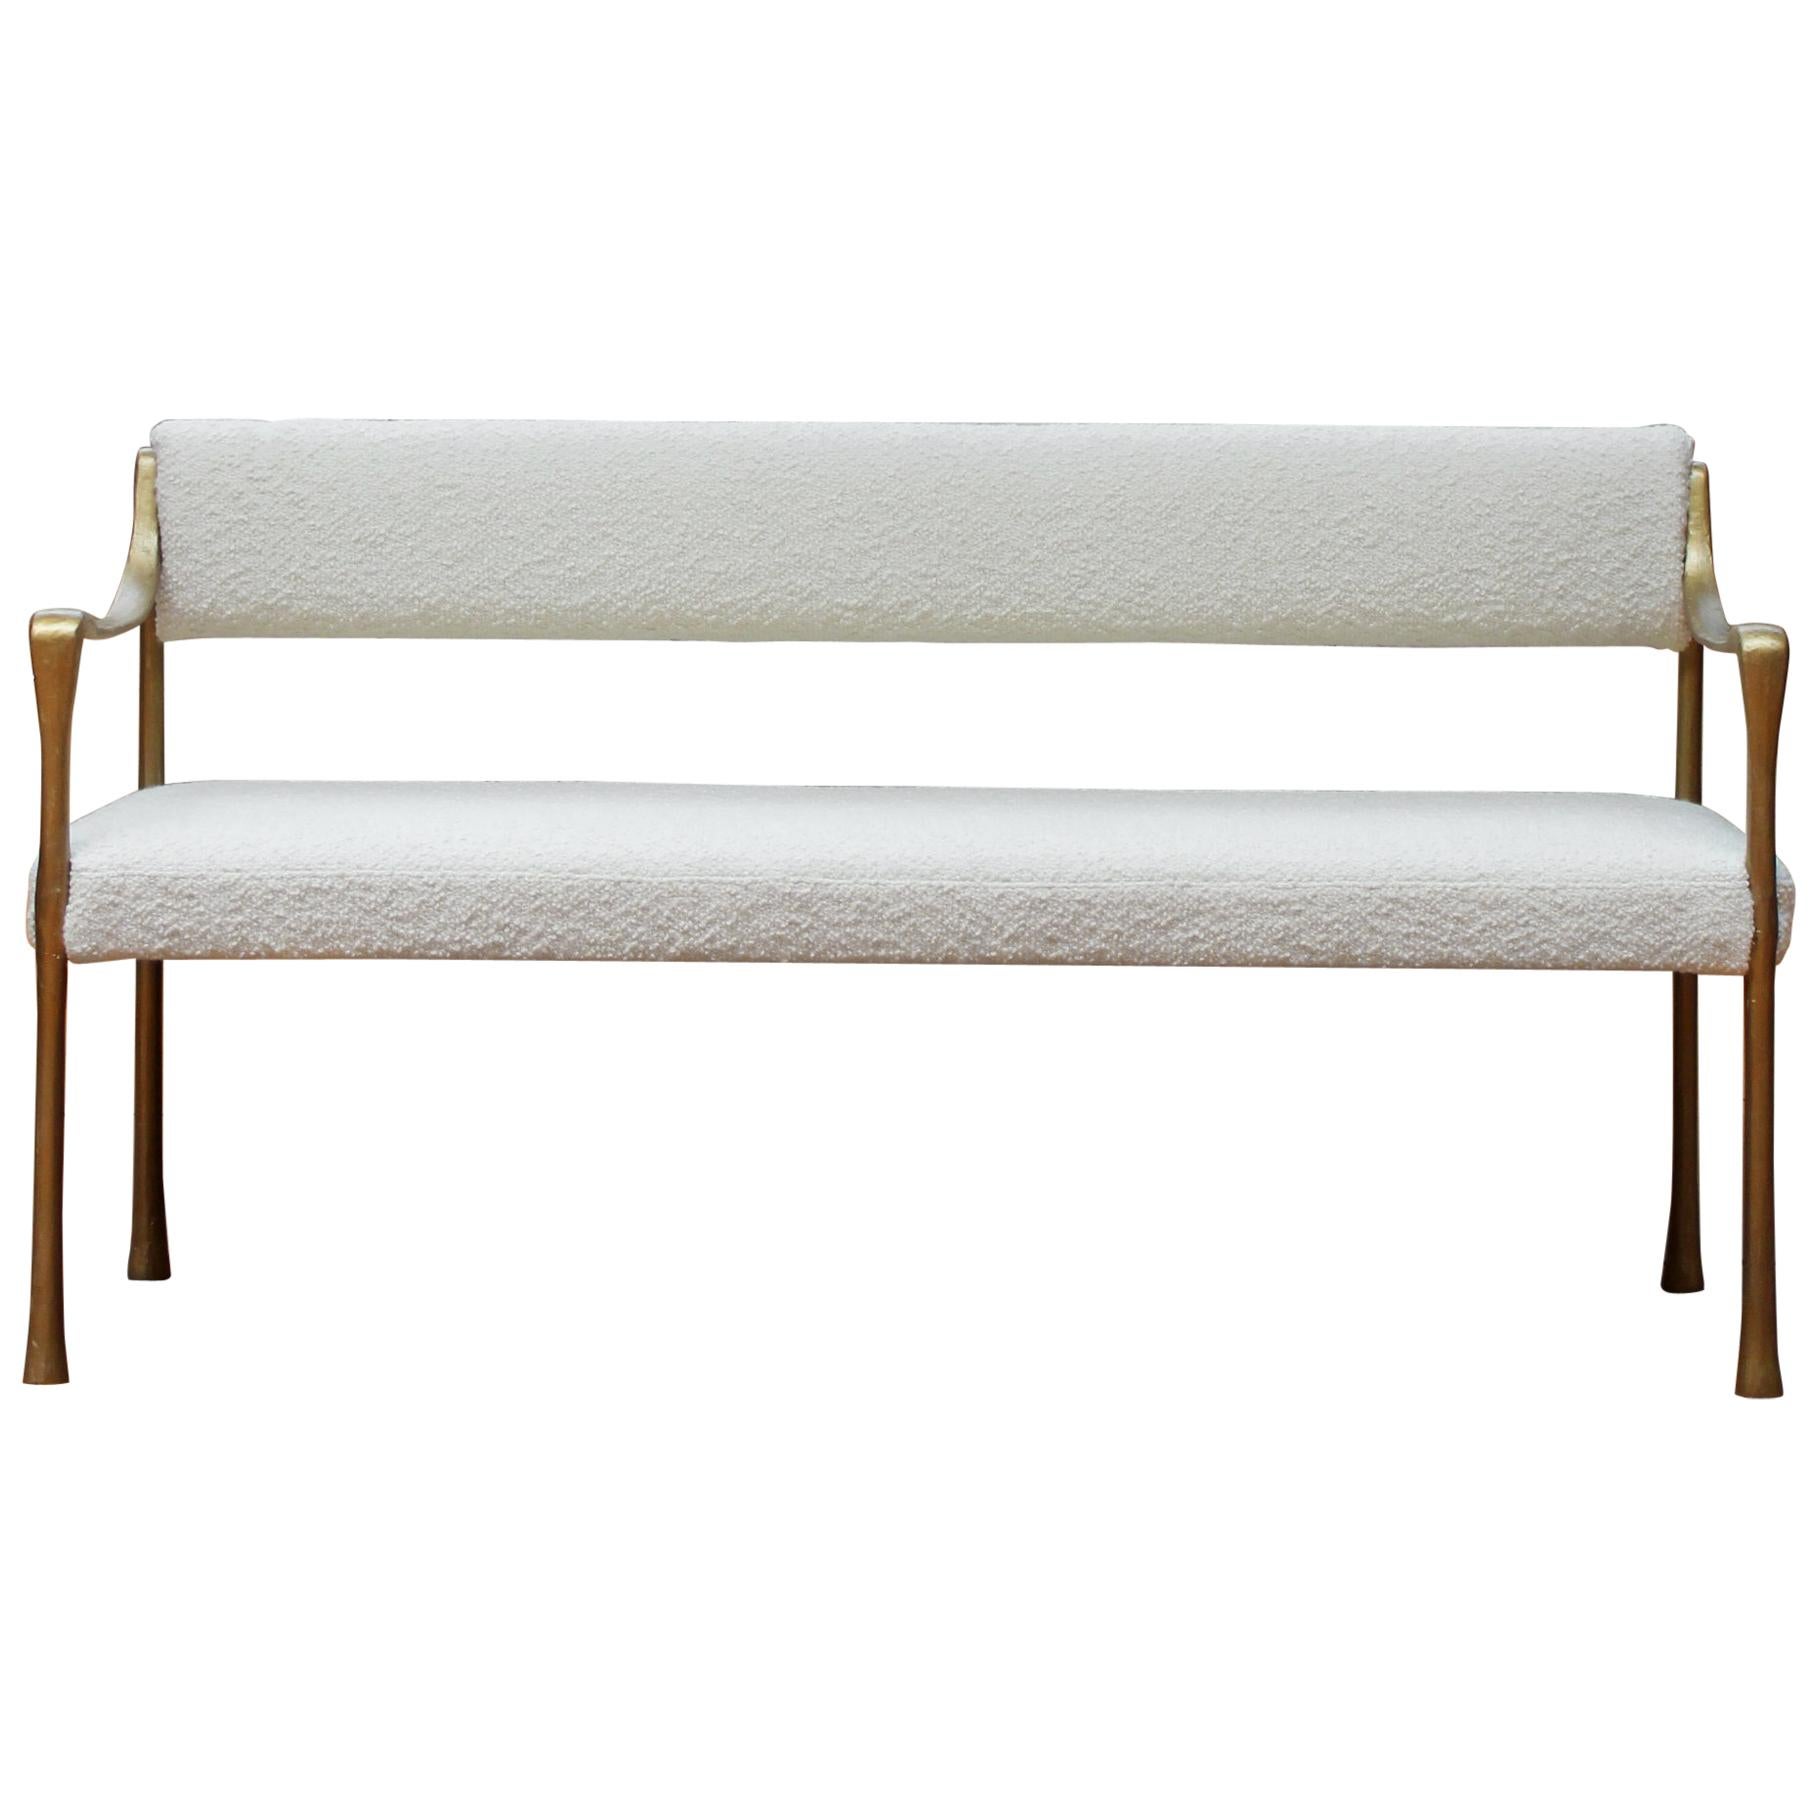 60" Giac Settee with Aluminum Hand Patinated  Frame Contemporary Seating For Sale